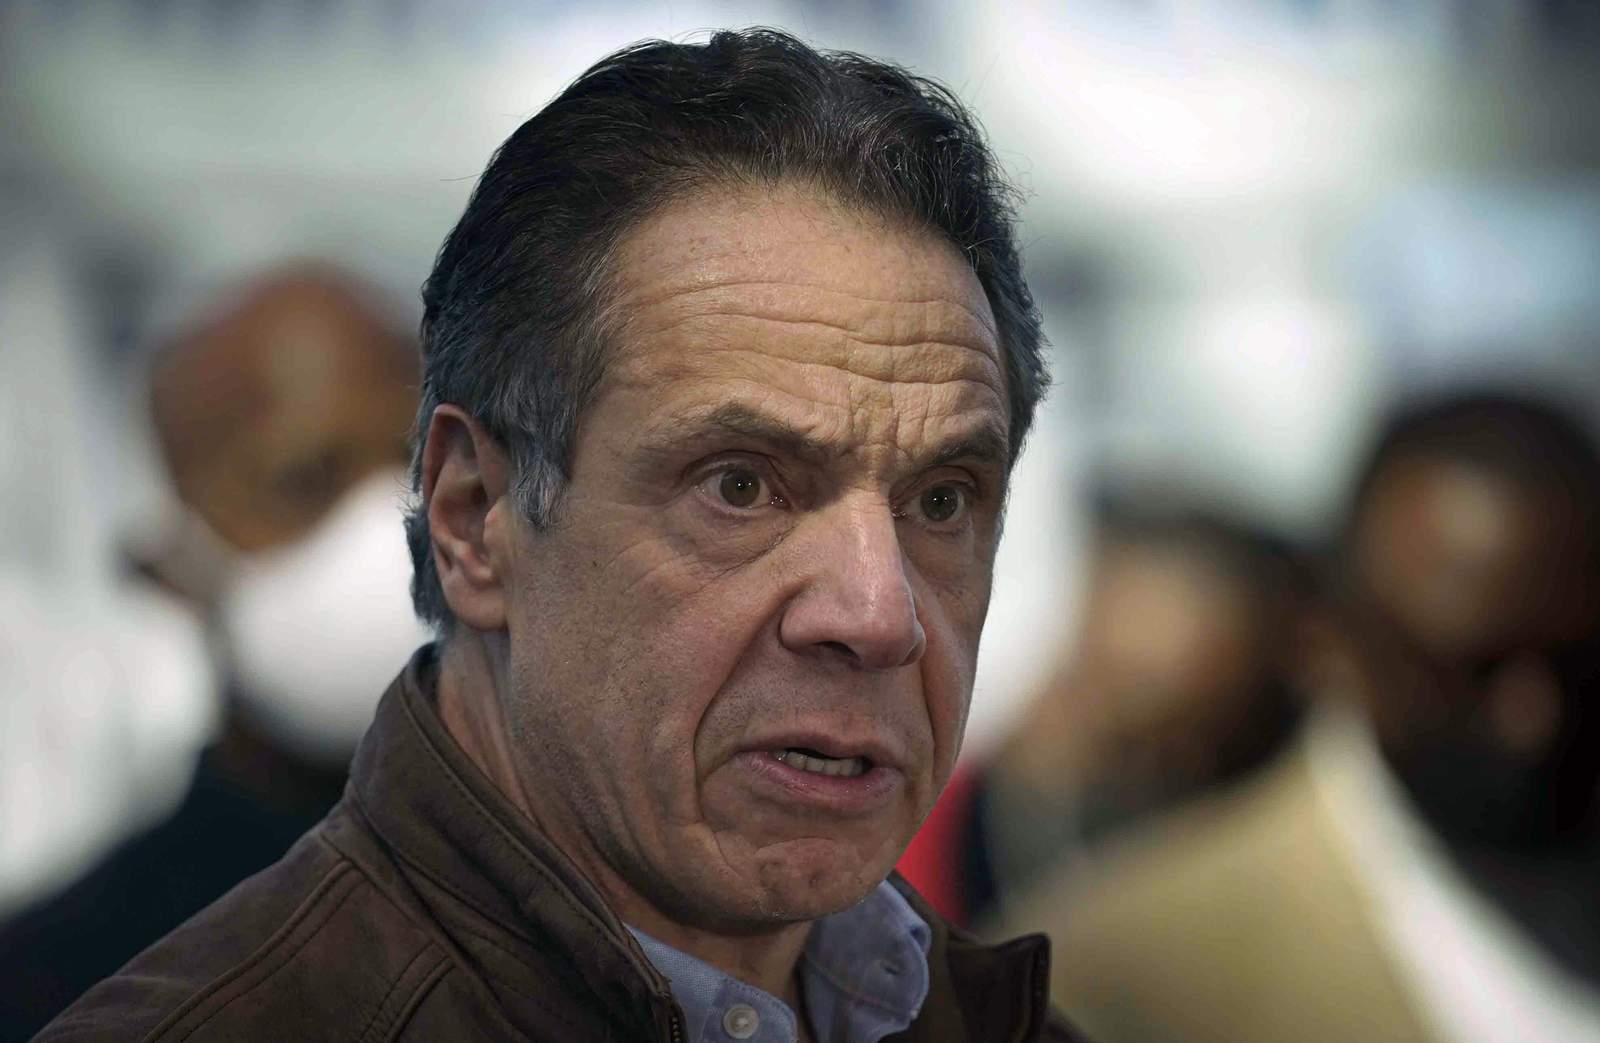 Top Dems call on Cuomo to resign amid harassment allegations